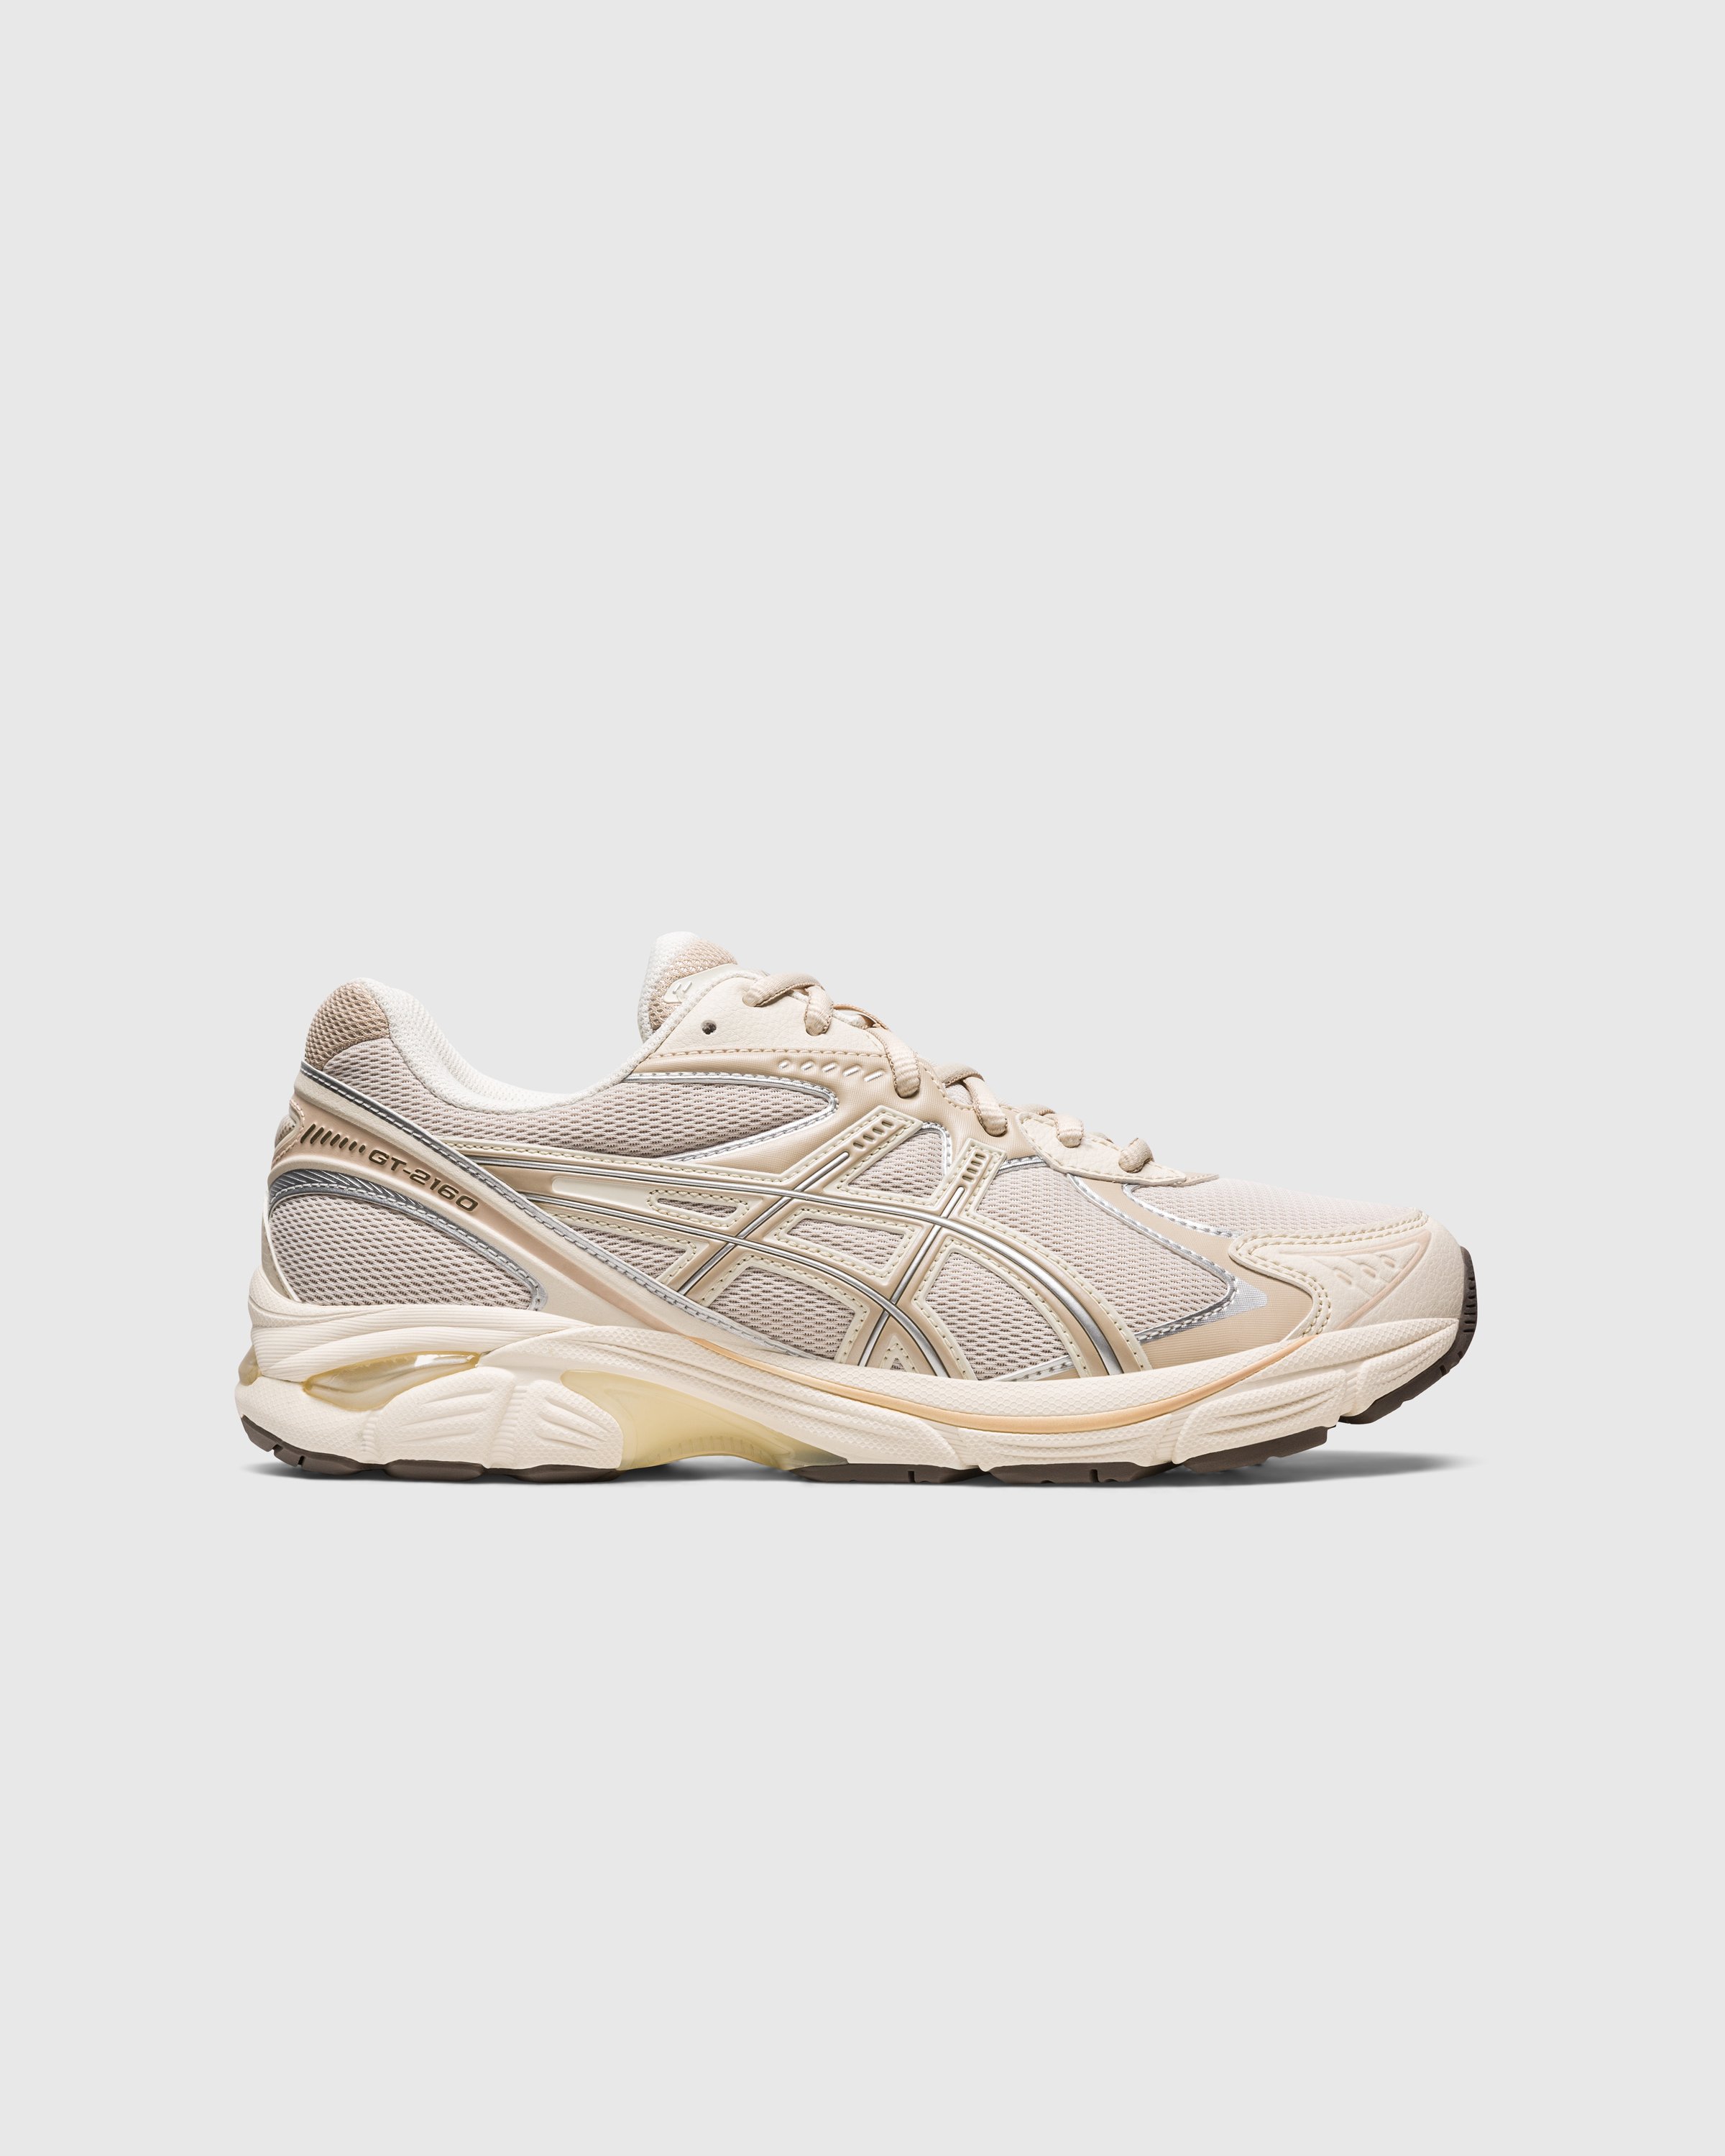 asics - GT-2160 Oatmeal/Simply Taupe - Footwear - Multi - Image 1